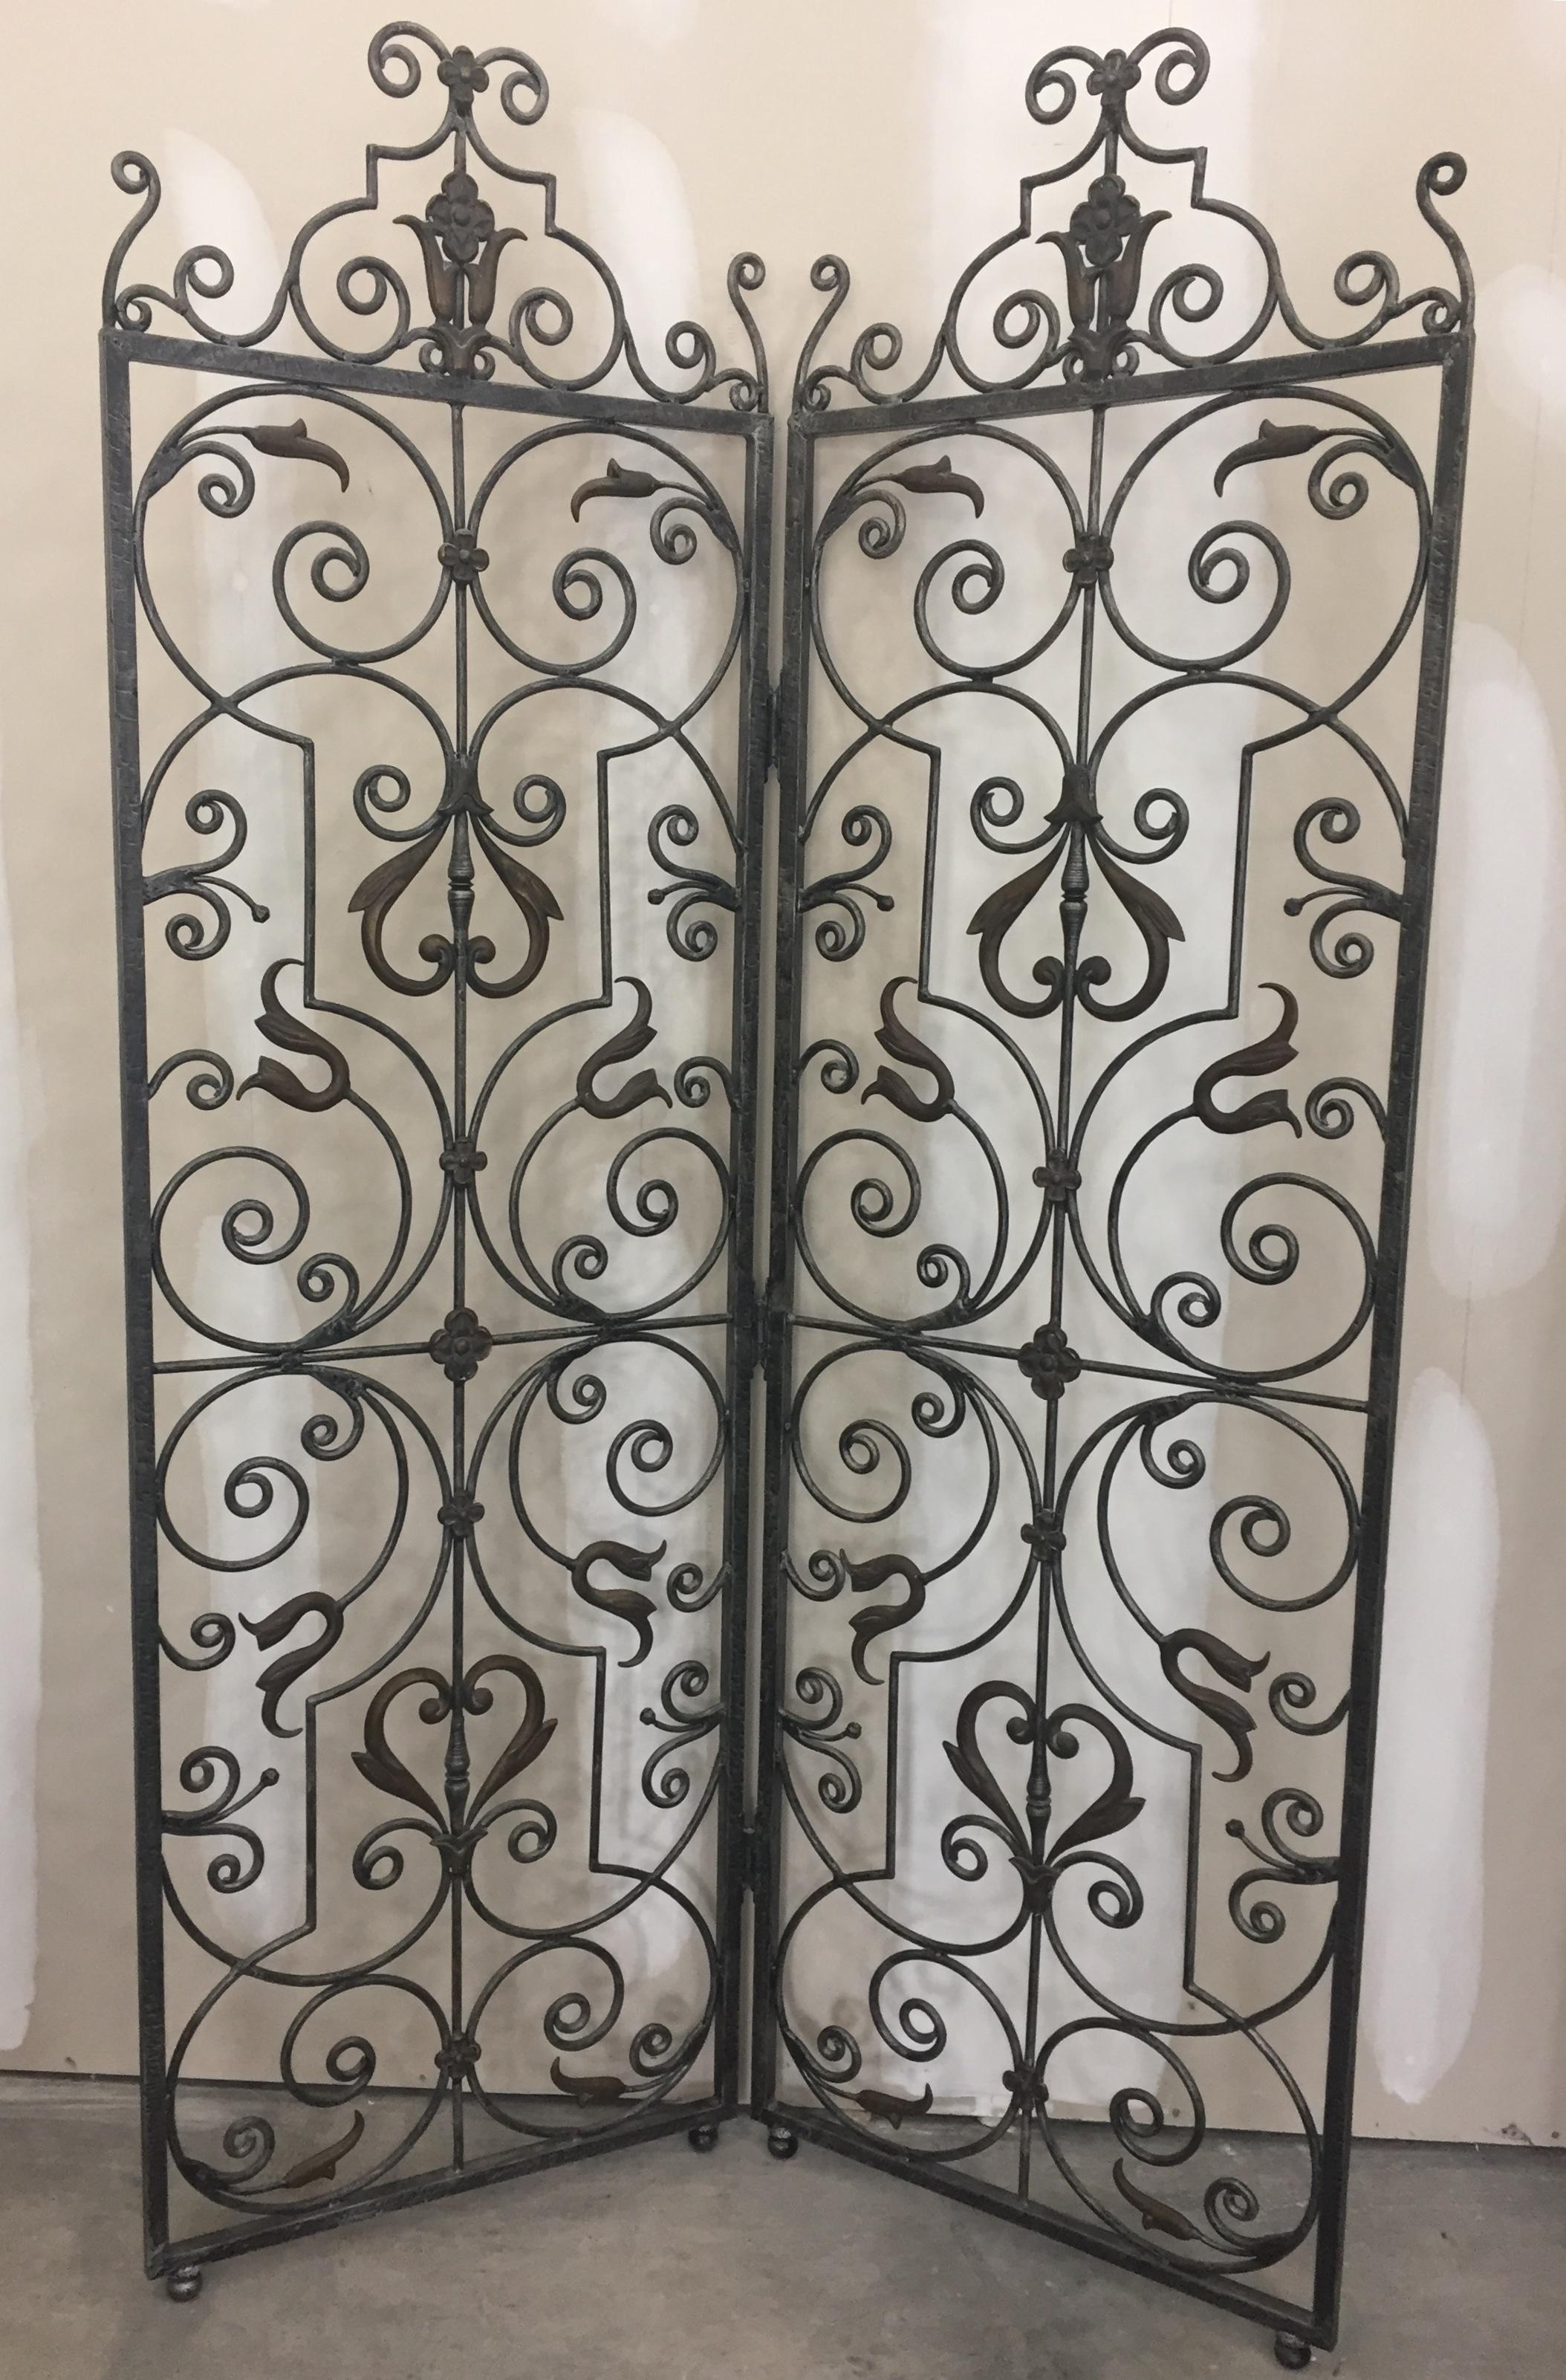 A wonderful hand forged gun metal colored wrought iron screen or room divider that adds an unexpected airy textural element to a space. 

Each panel is 24 W.